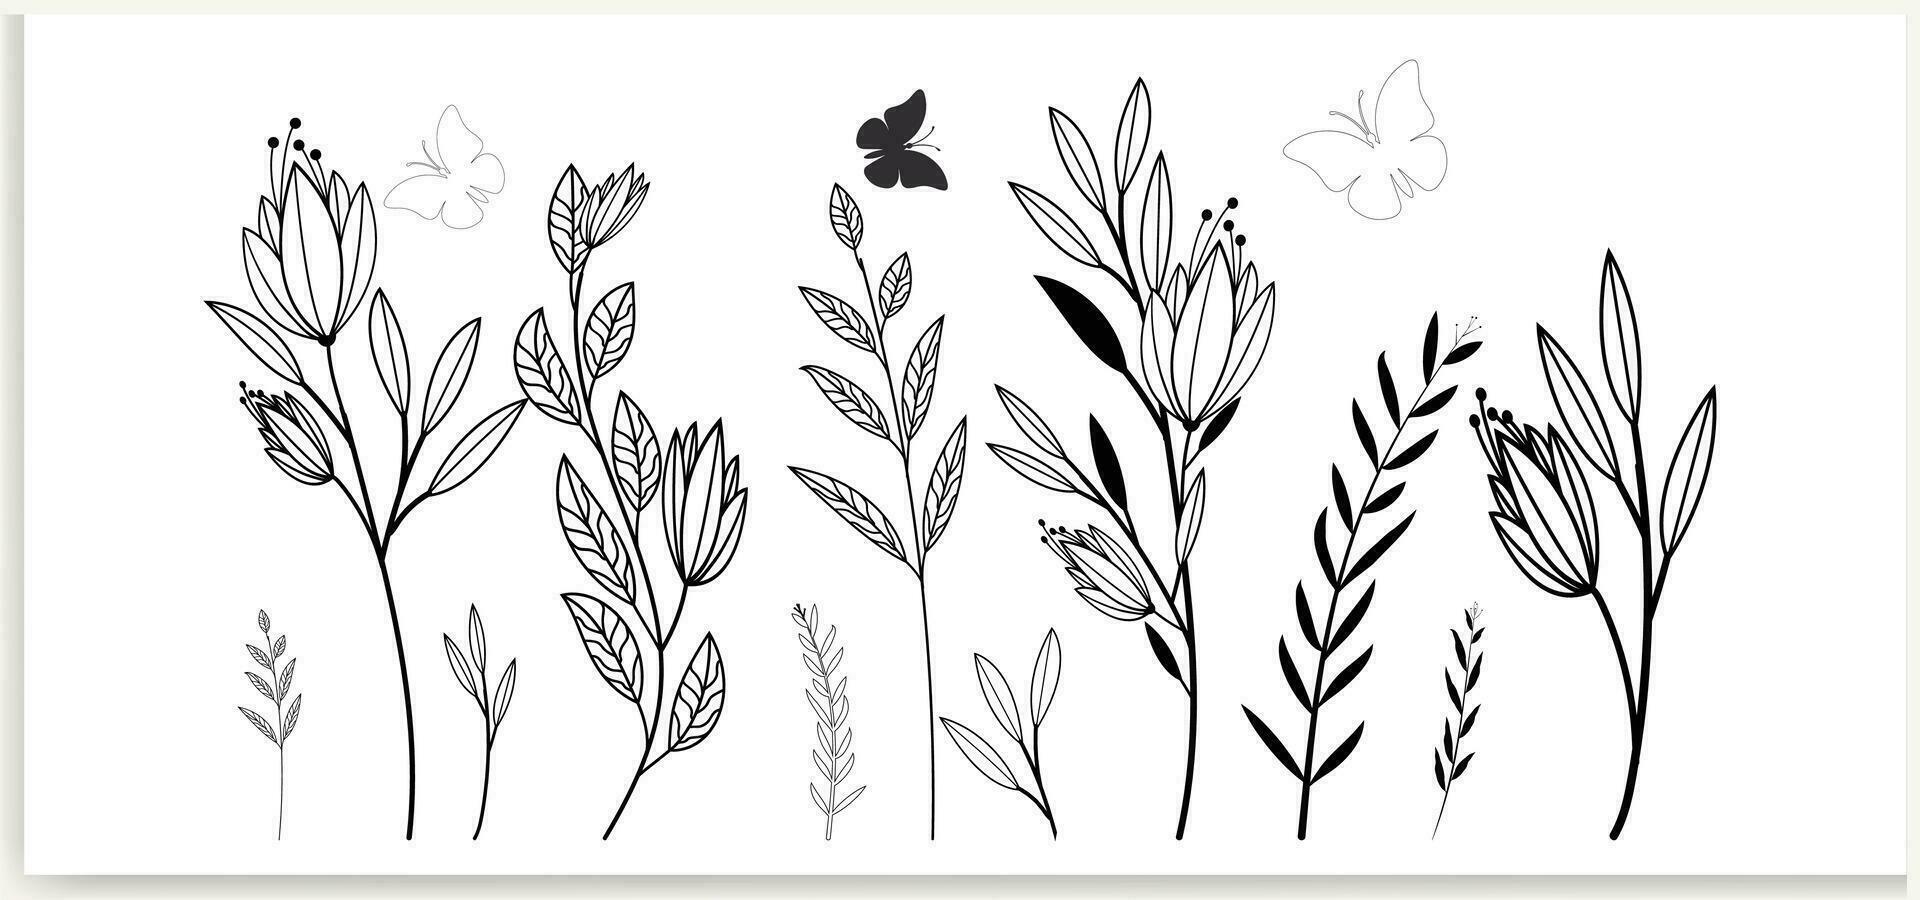 Botanical abstract line art, hand-drawn bouquets of herbs, flowers, leaves, and branches, vector illustration